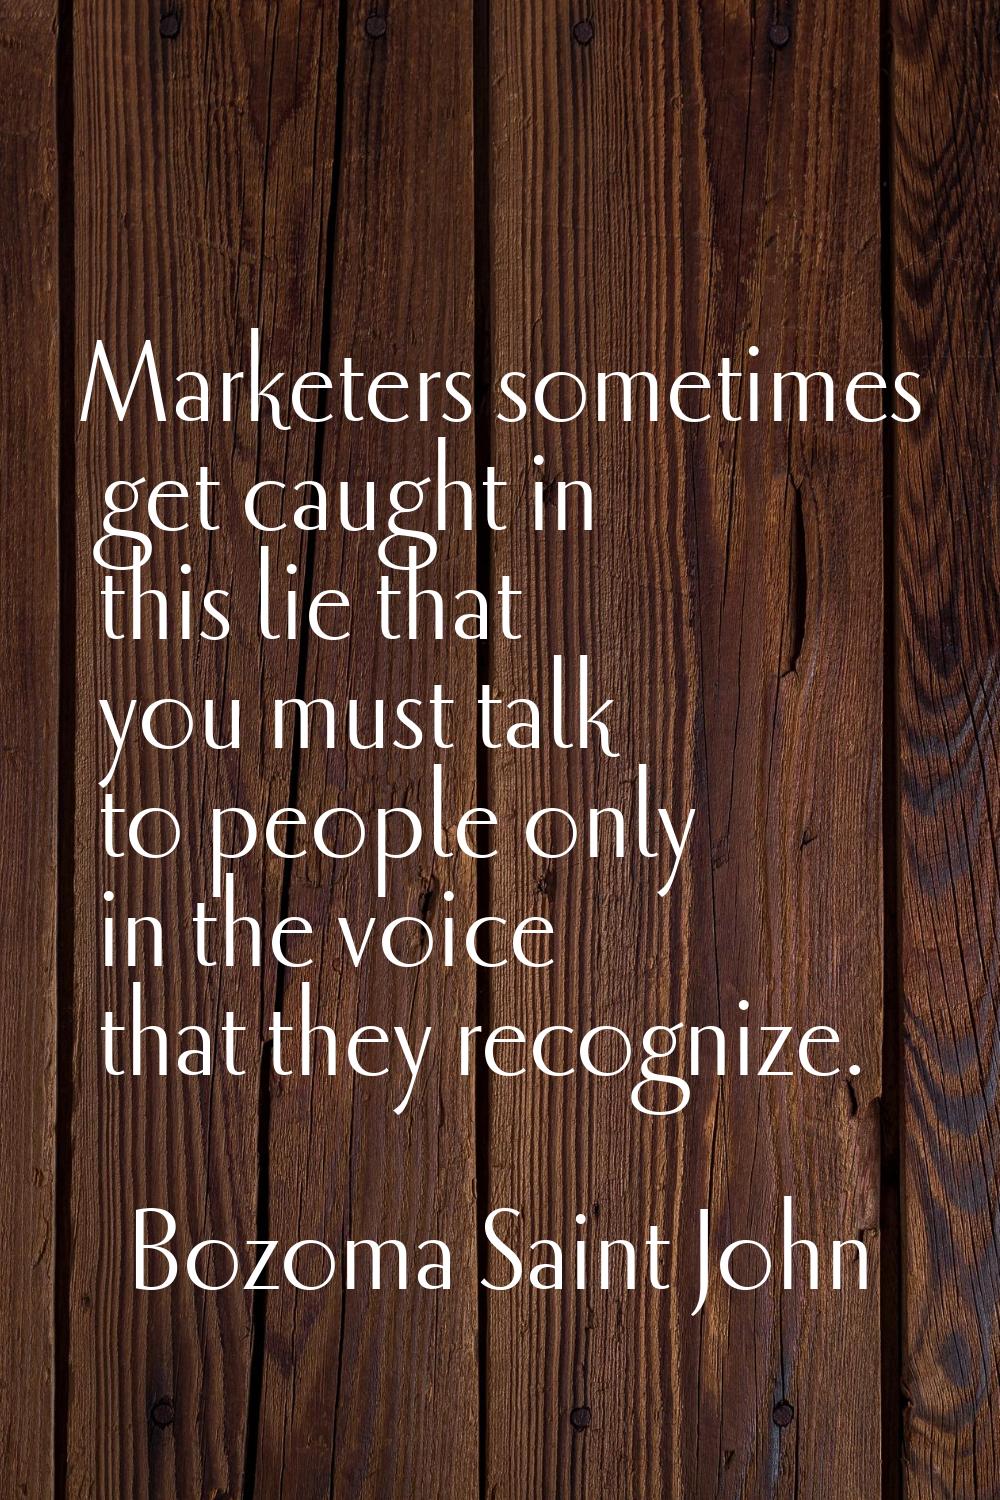 Marketers sometimes get caught in this lie that you must talk to people only in the voice that they